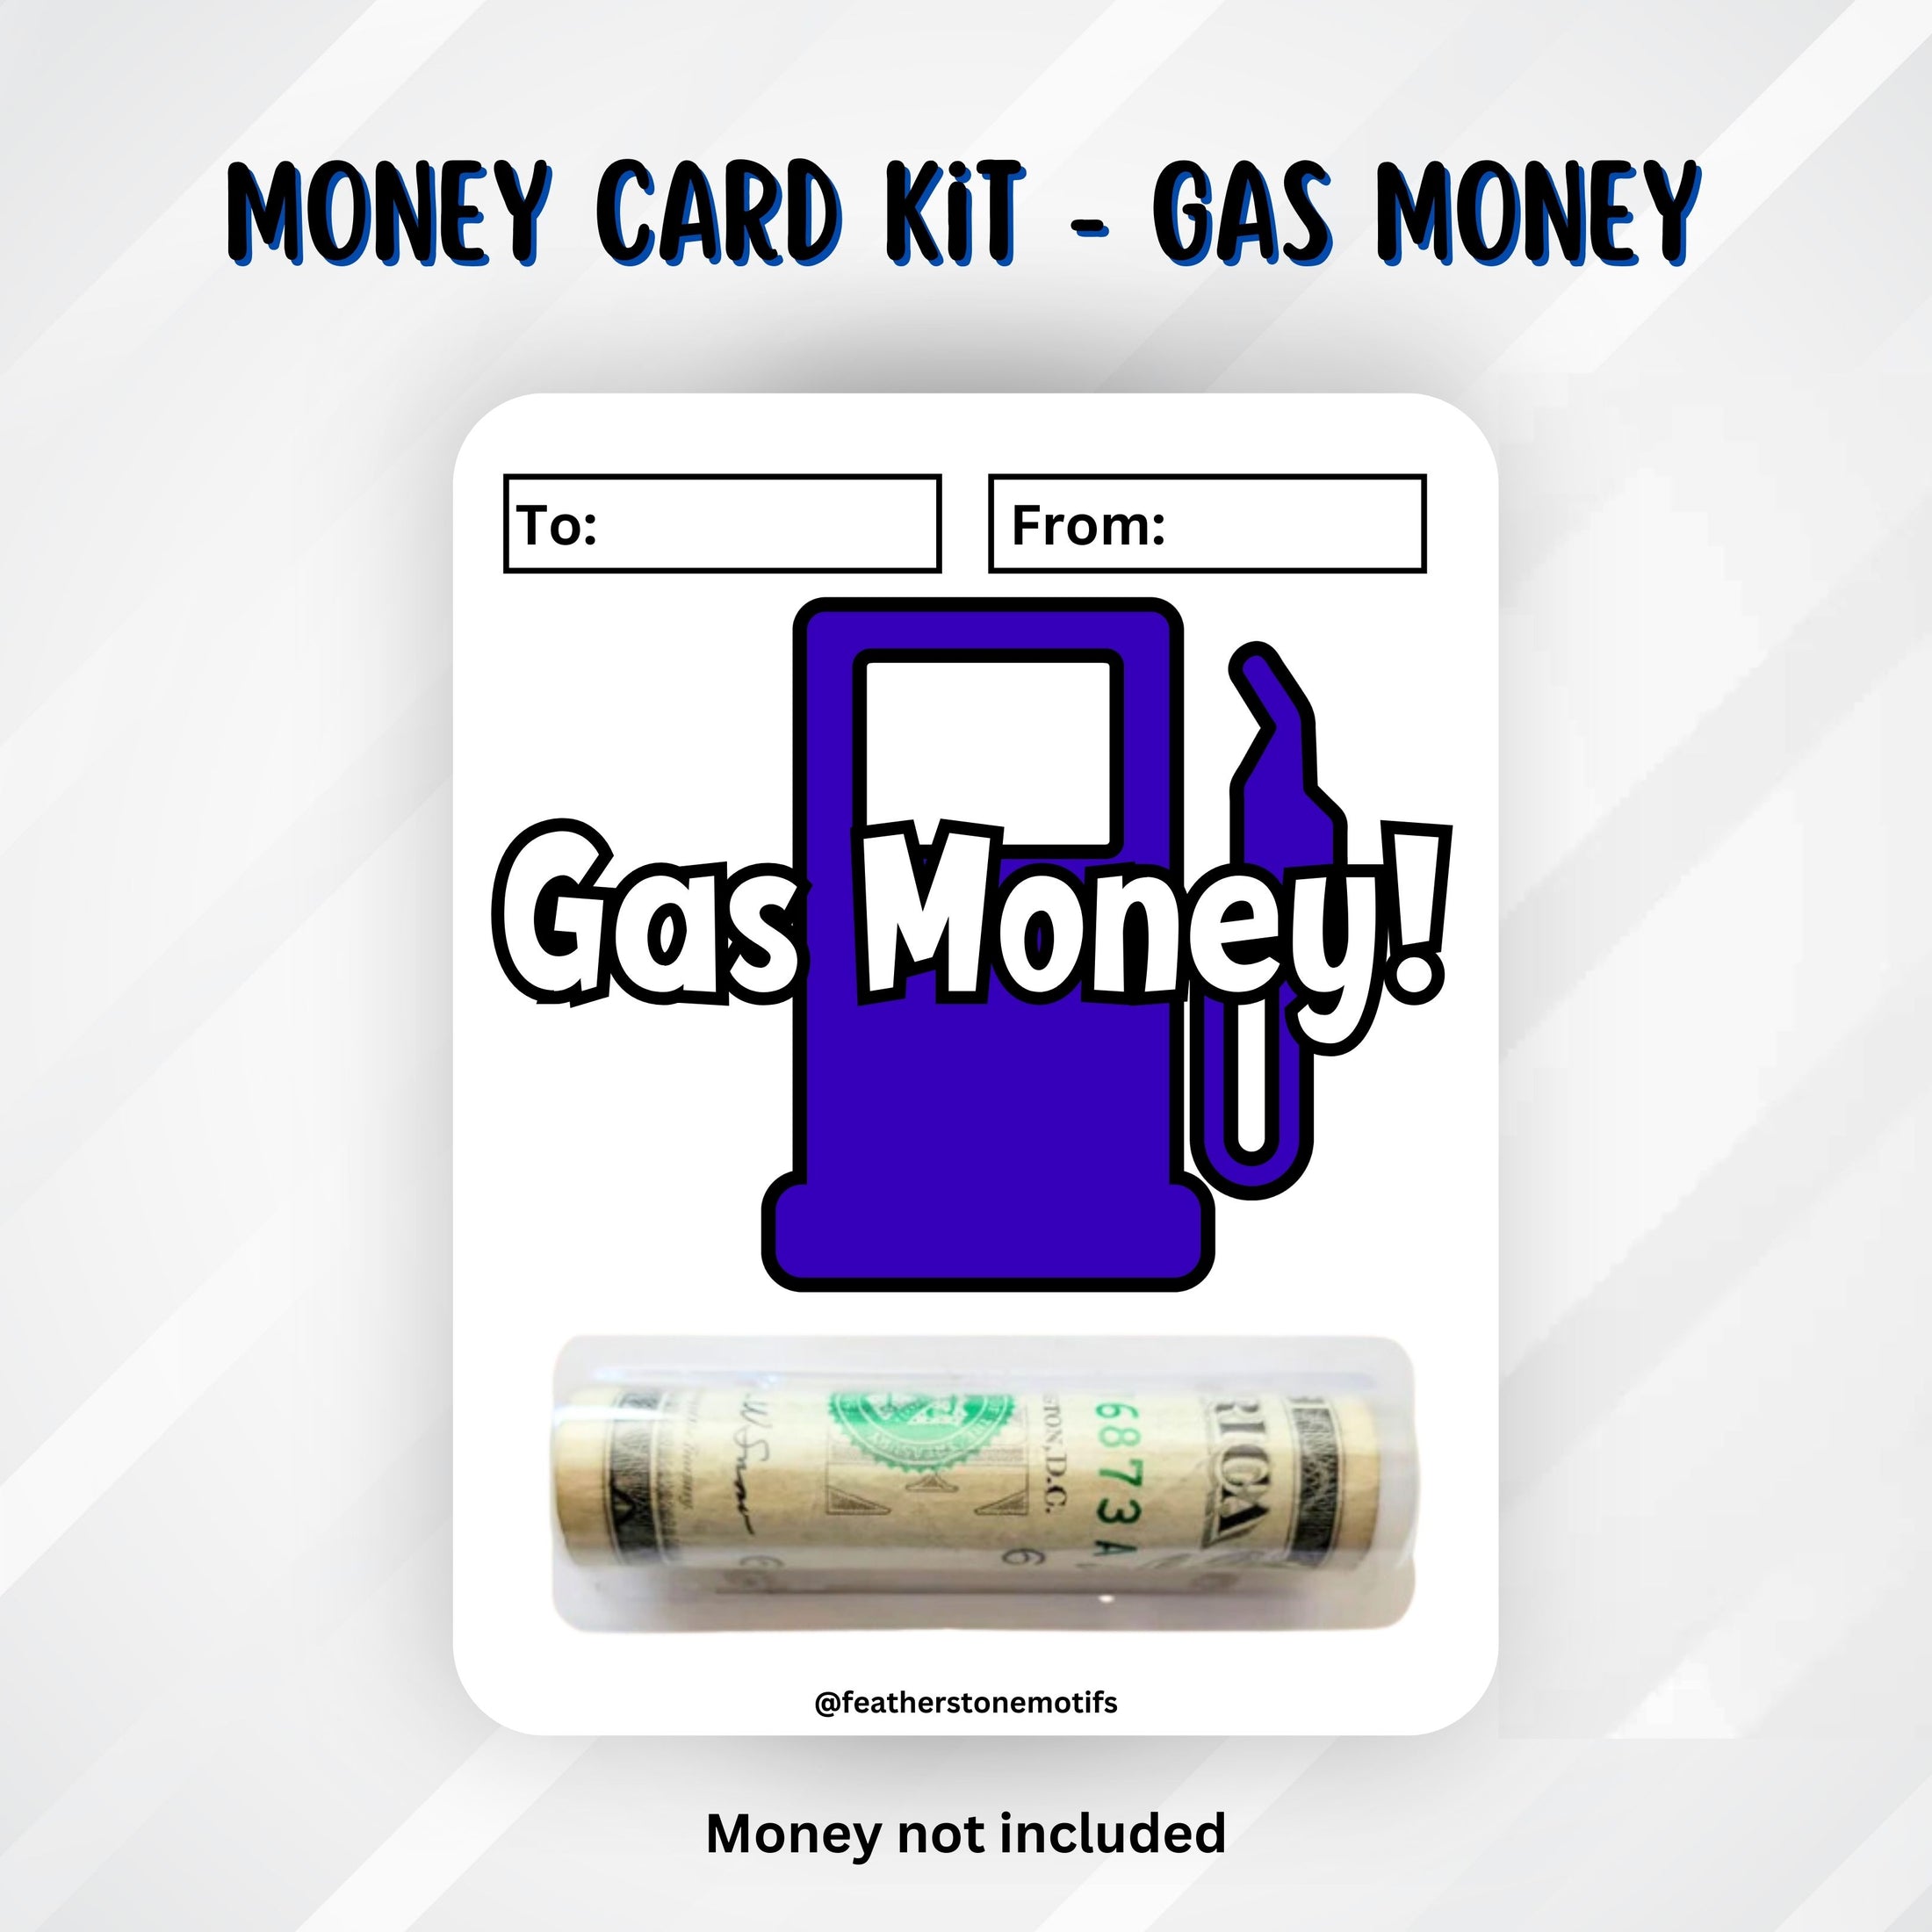 This image shows the money tube attached to the Gas Money 3 Money Card.